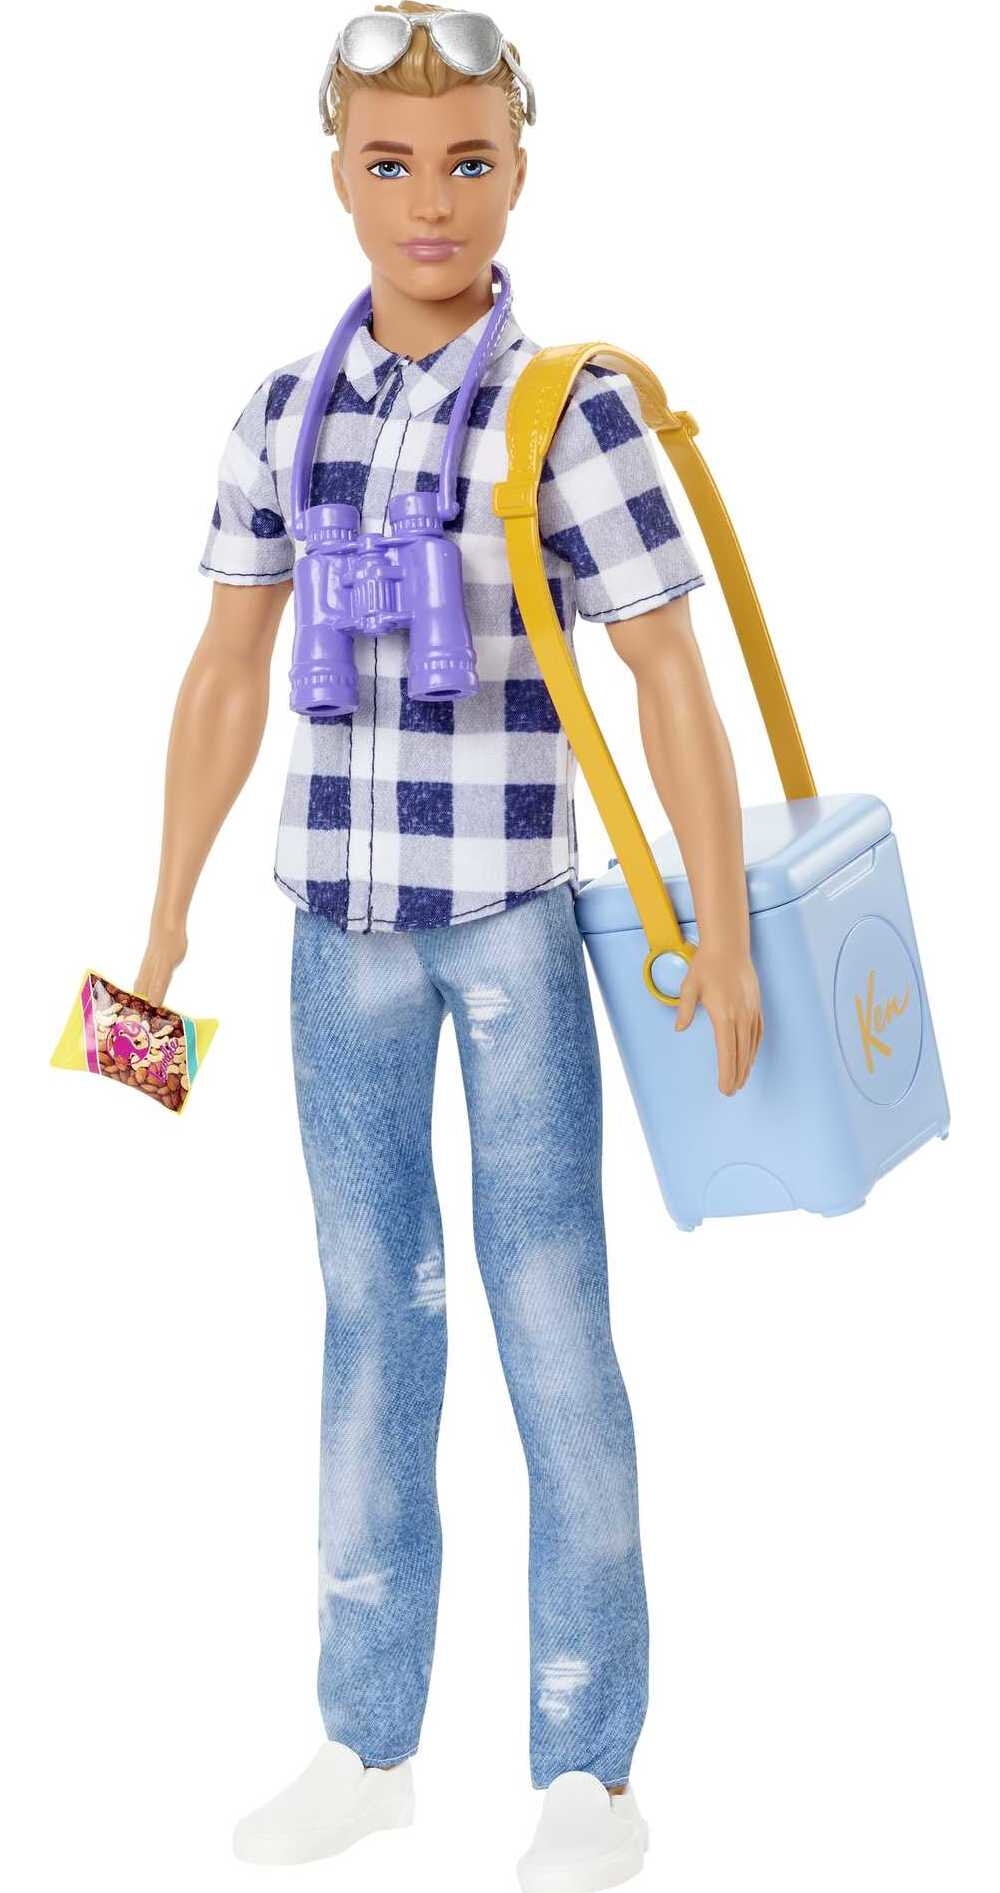 Barbie It Takes Two Ken Doll & Camping Accessories, Blonde Doll